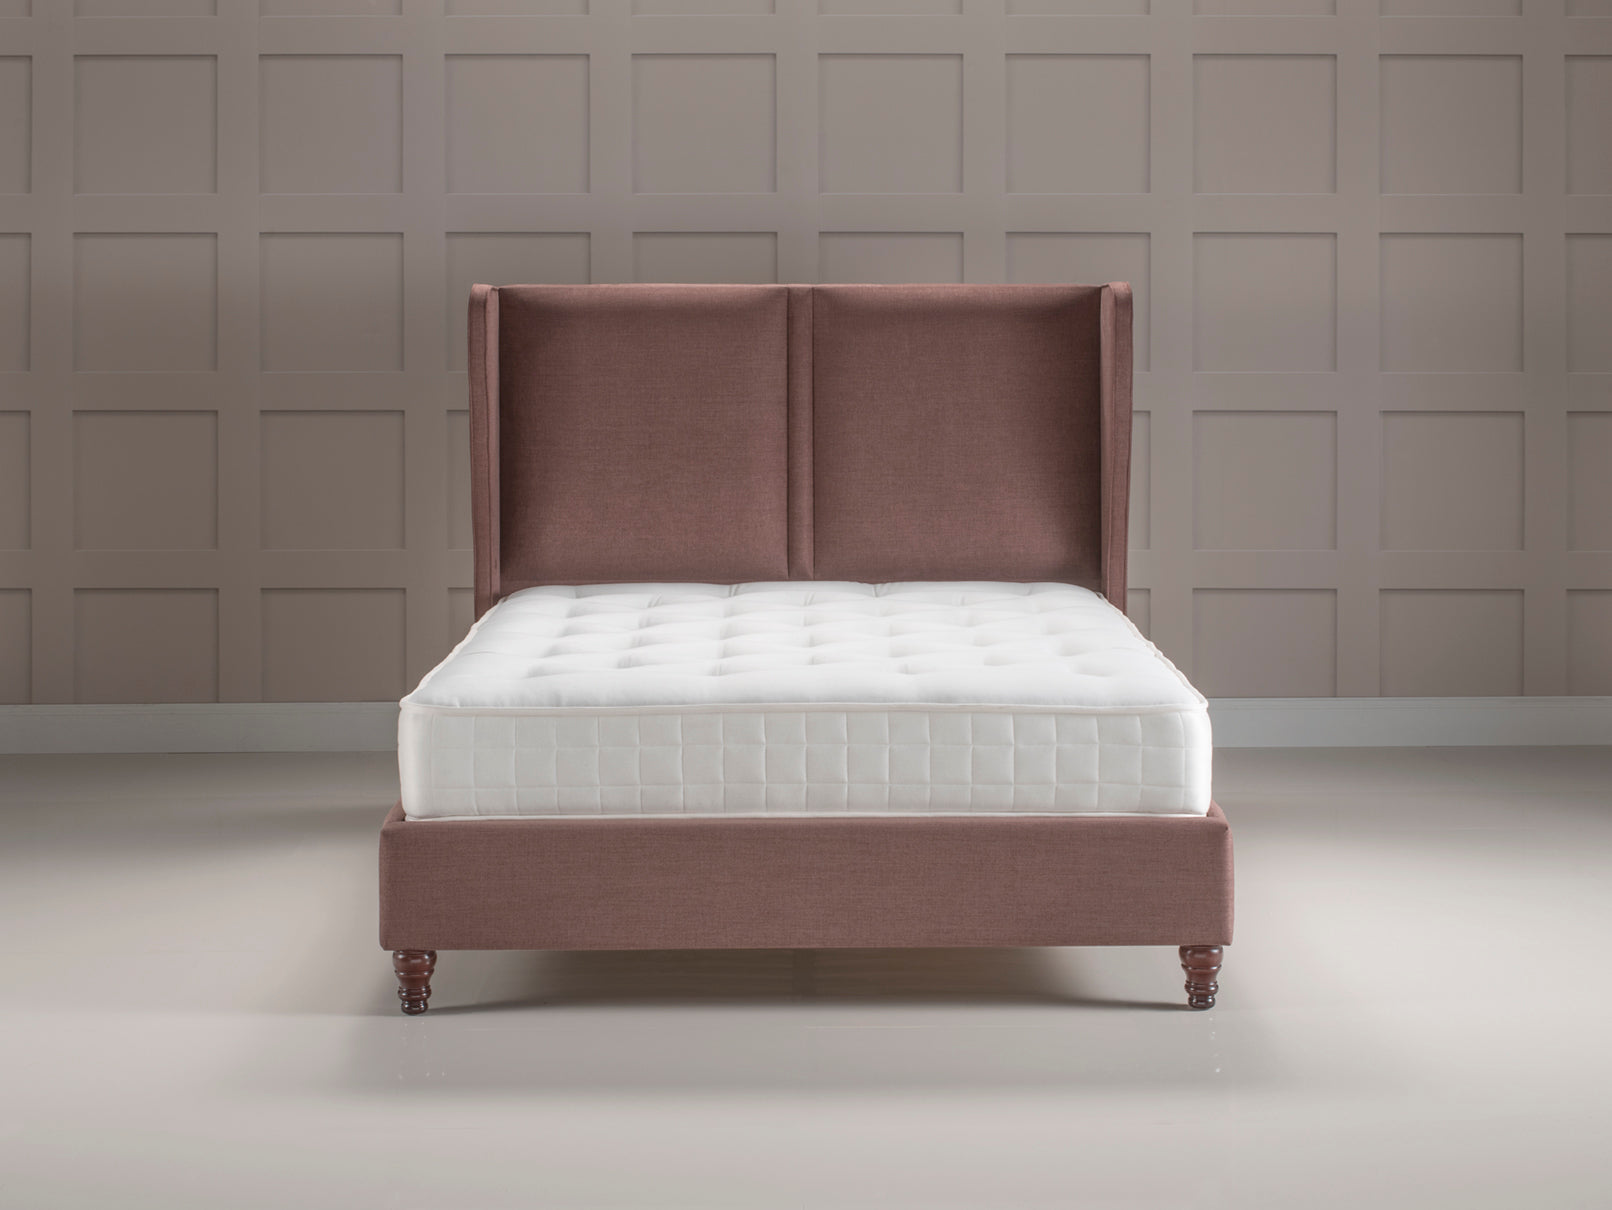 The Ardmore Upholstered Bed